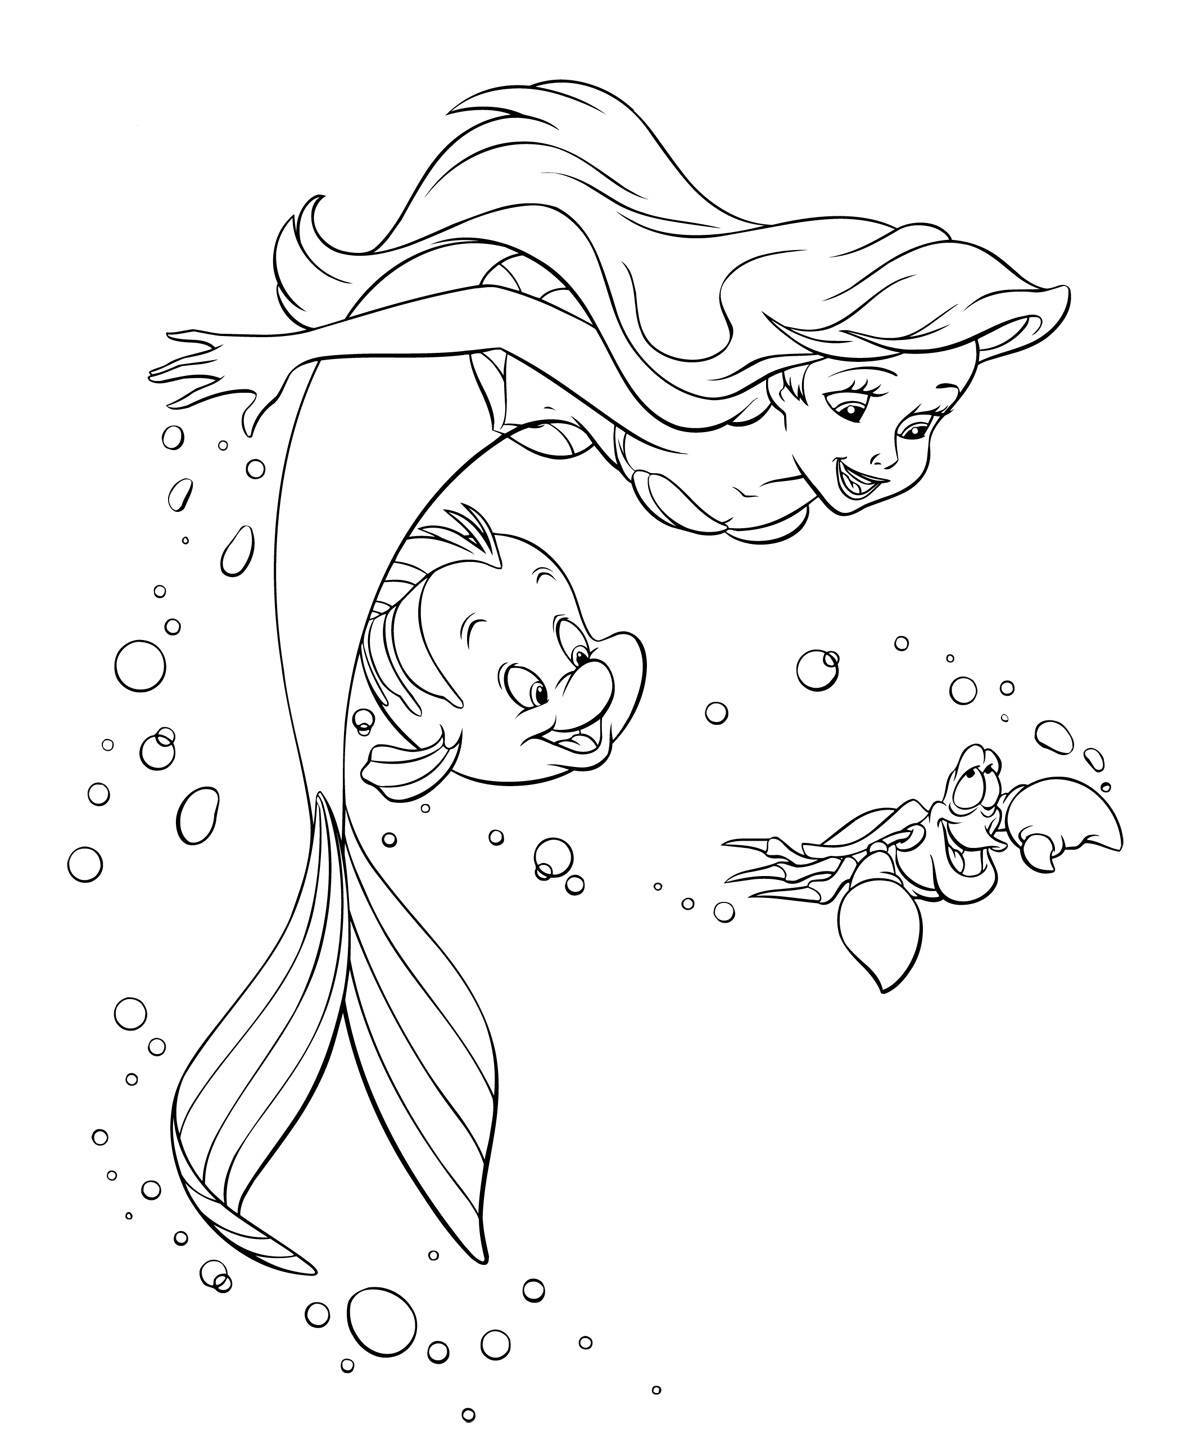 Fairy mermaid coloring page